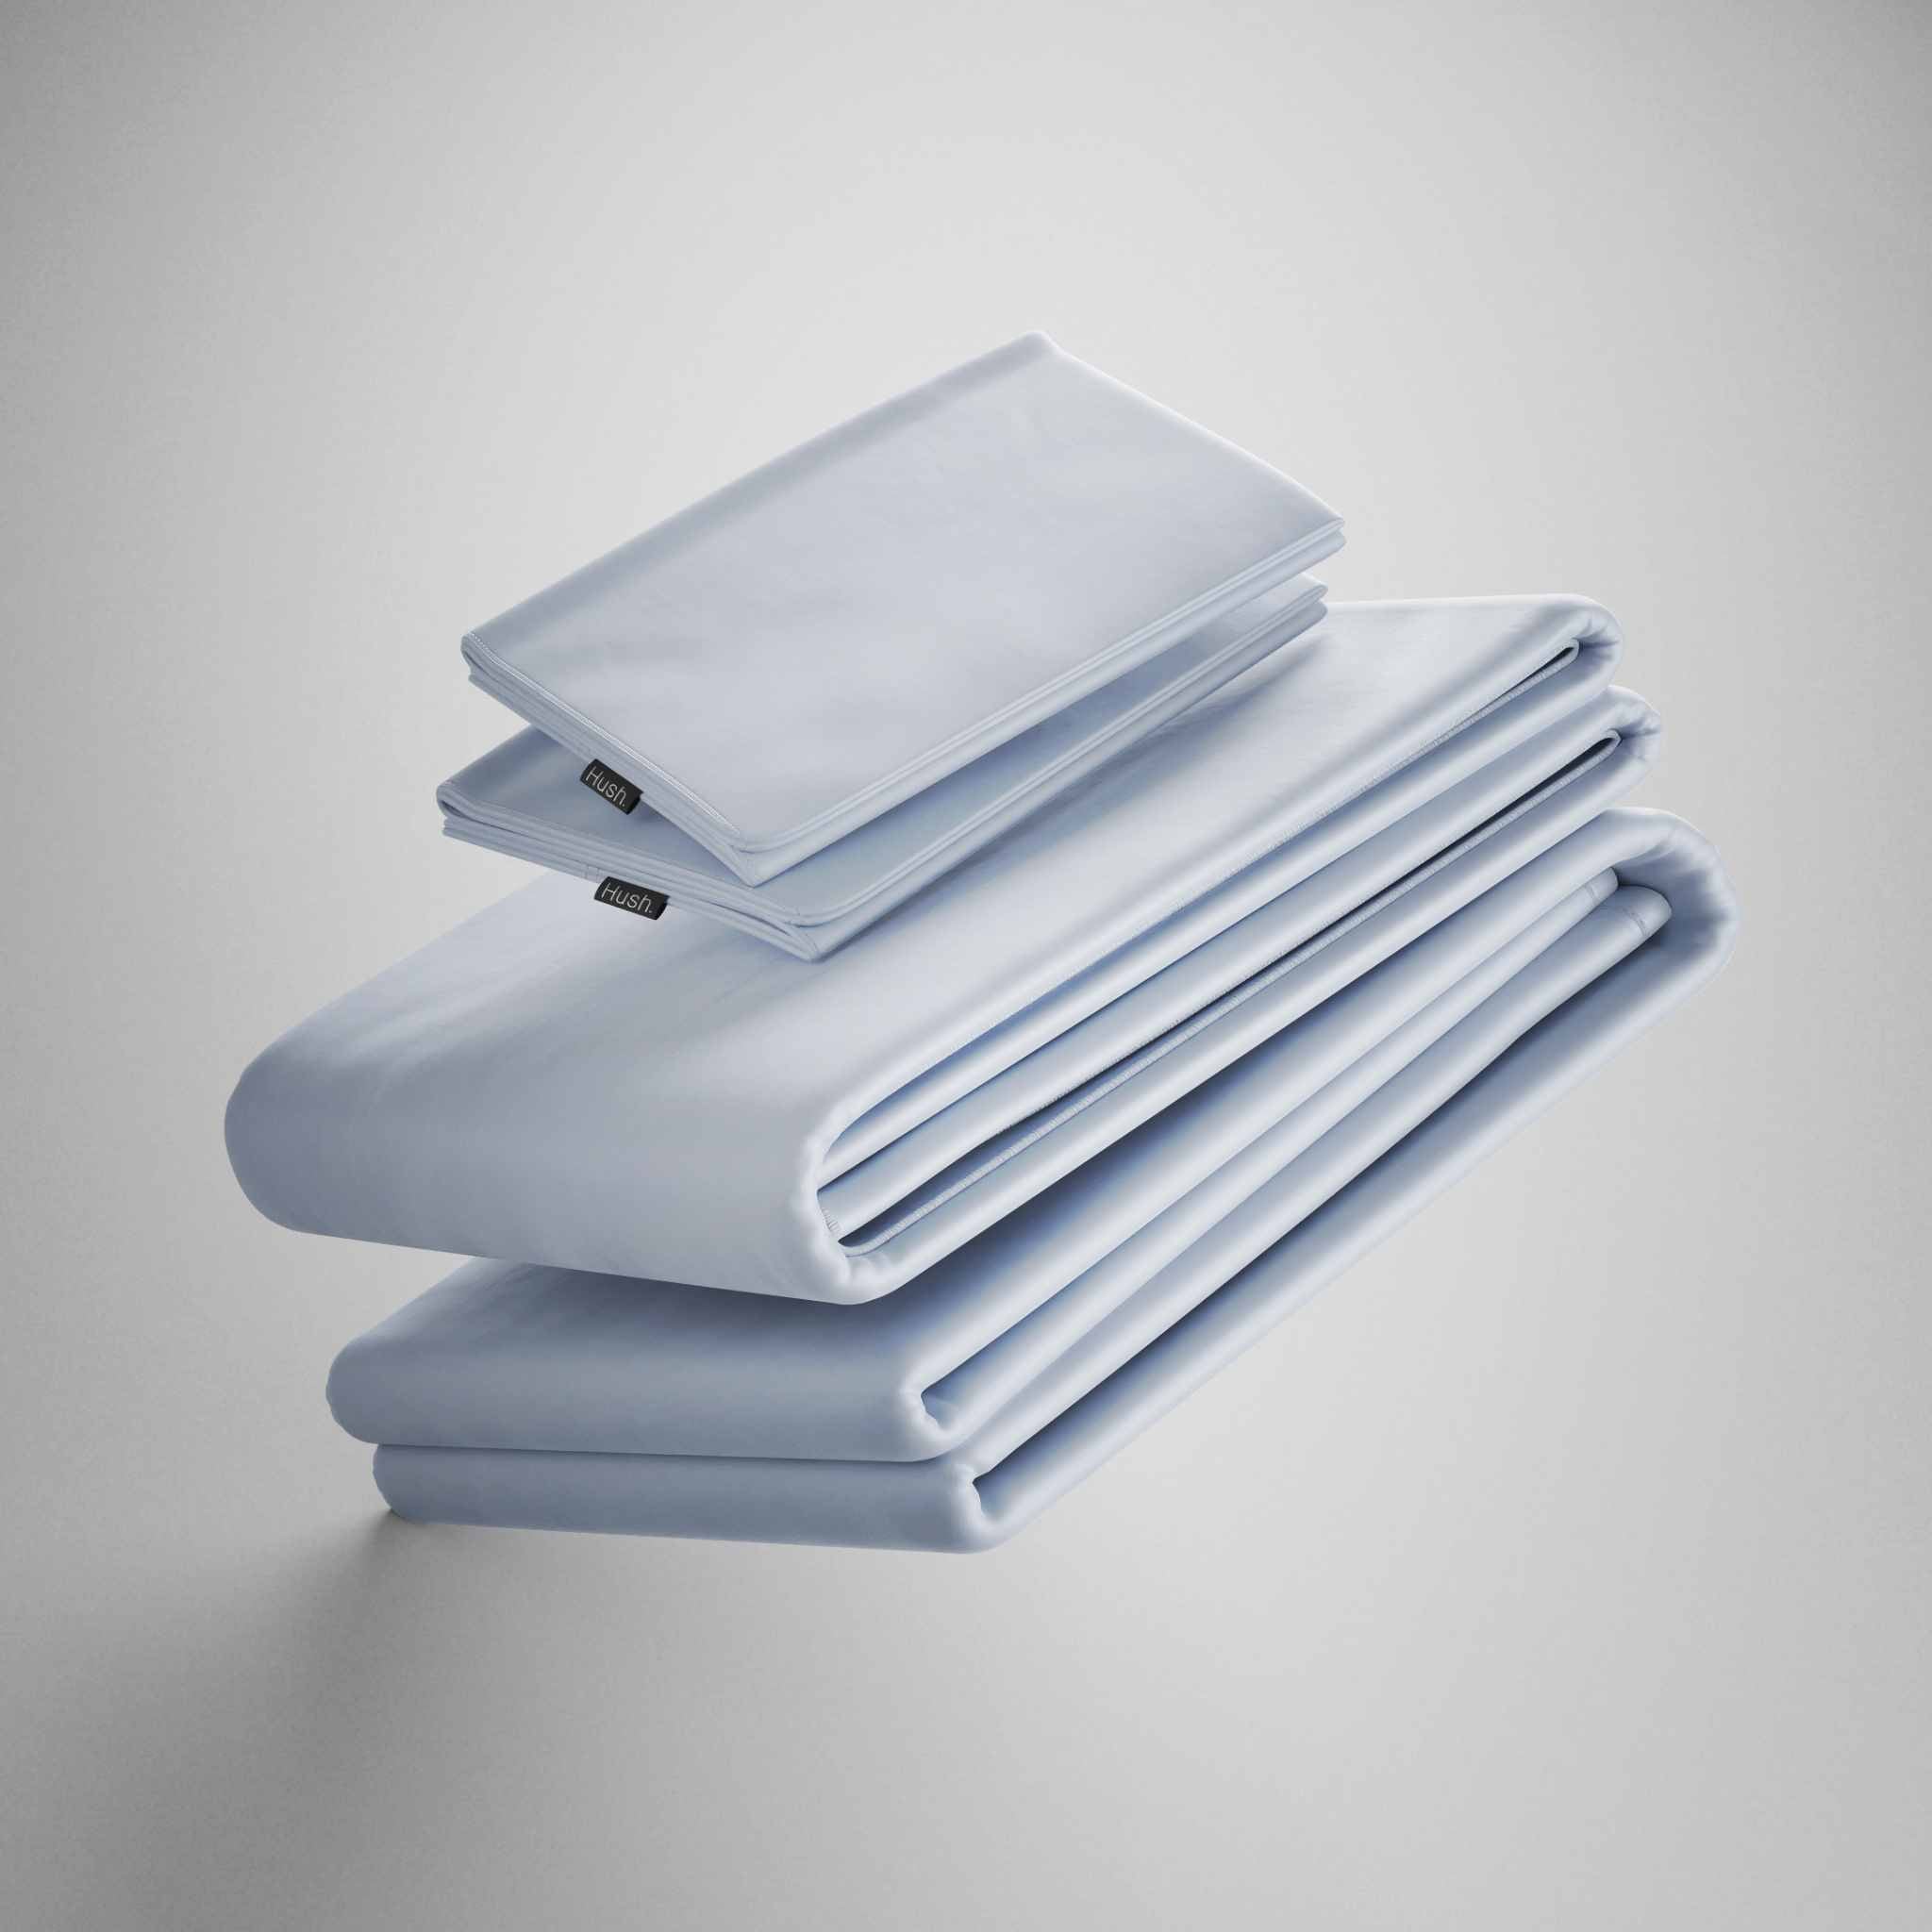 Do Hush Cooling Sheets Work … And Are They Worth The Price?